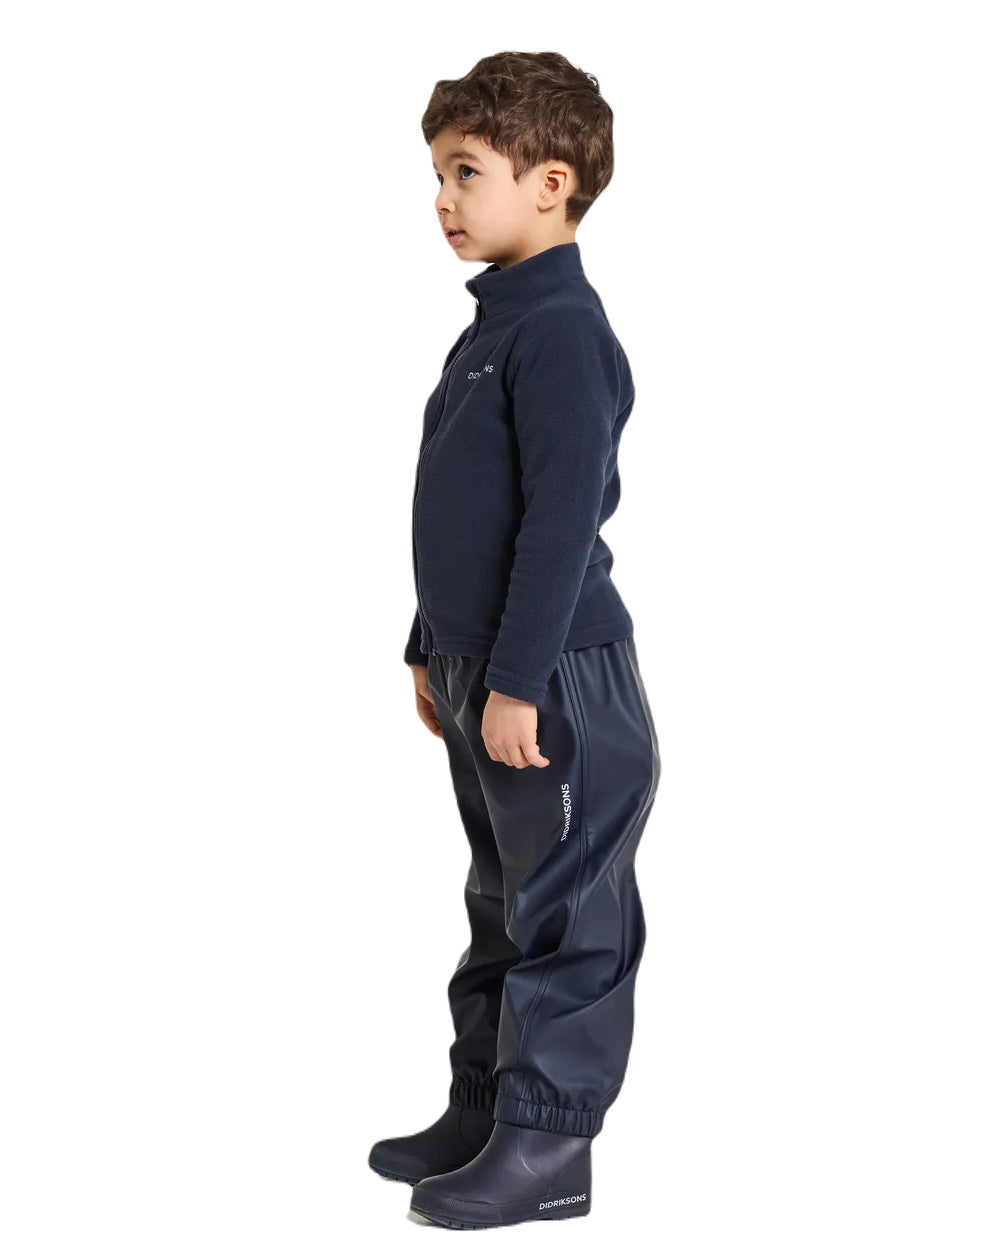 Navy Coloured Didriksons Midjeman Childrens Pants Galon On A White Background 